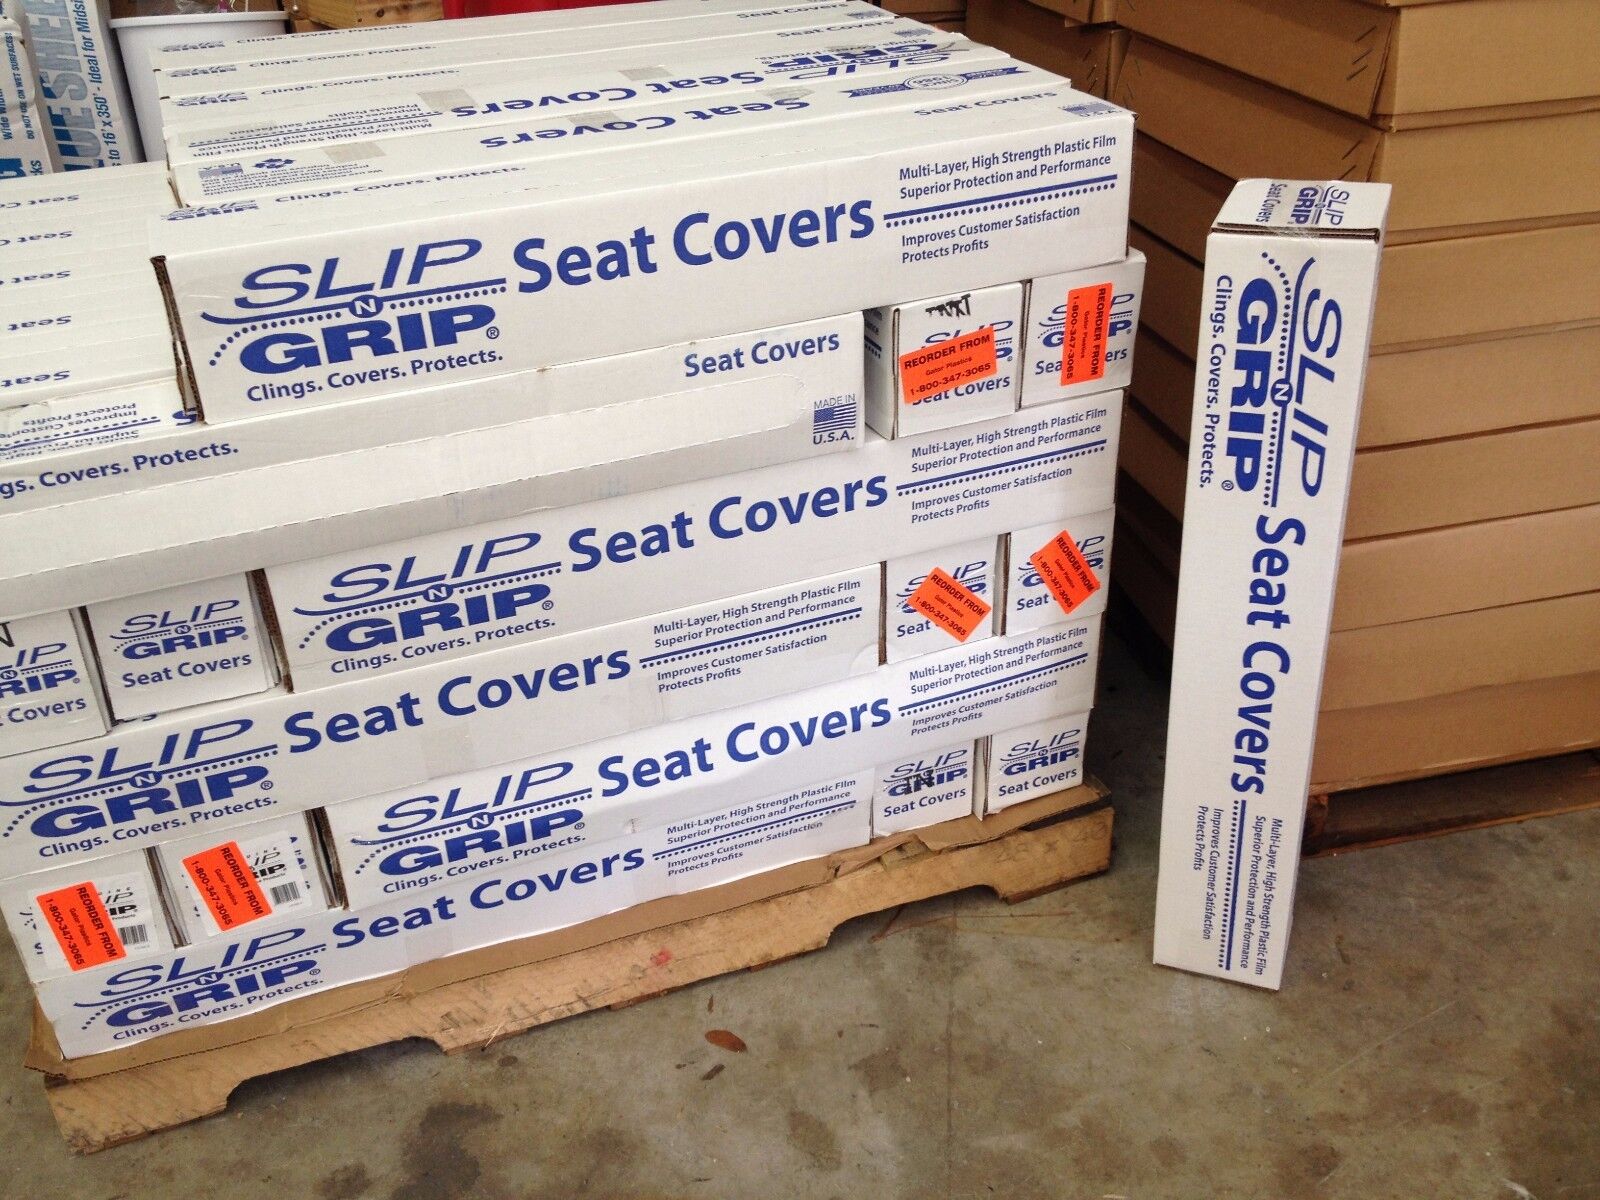 (1) Slip N Grip Seat Covers - 500 per roll, Disposable Plastic Auto Seat Covers